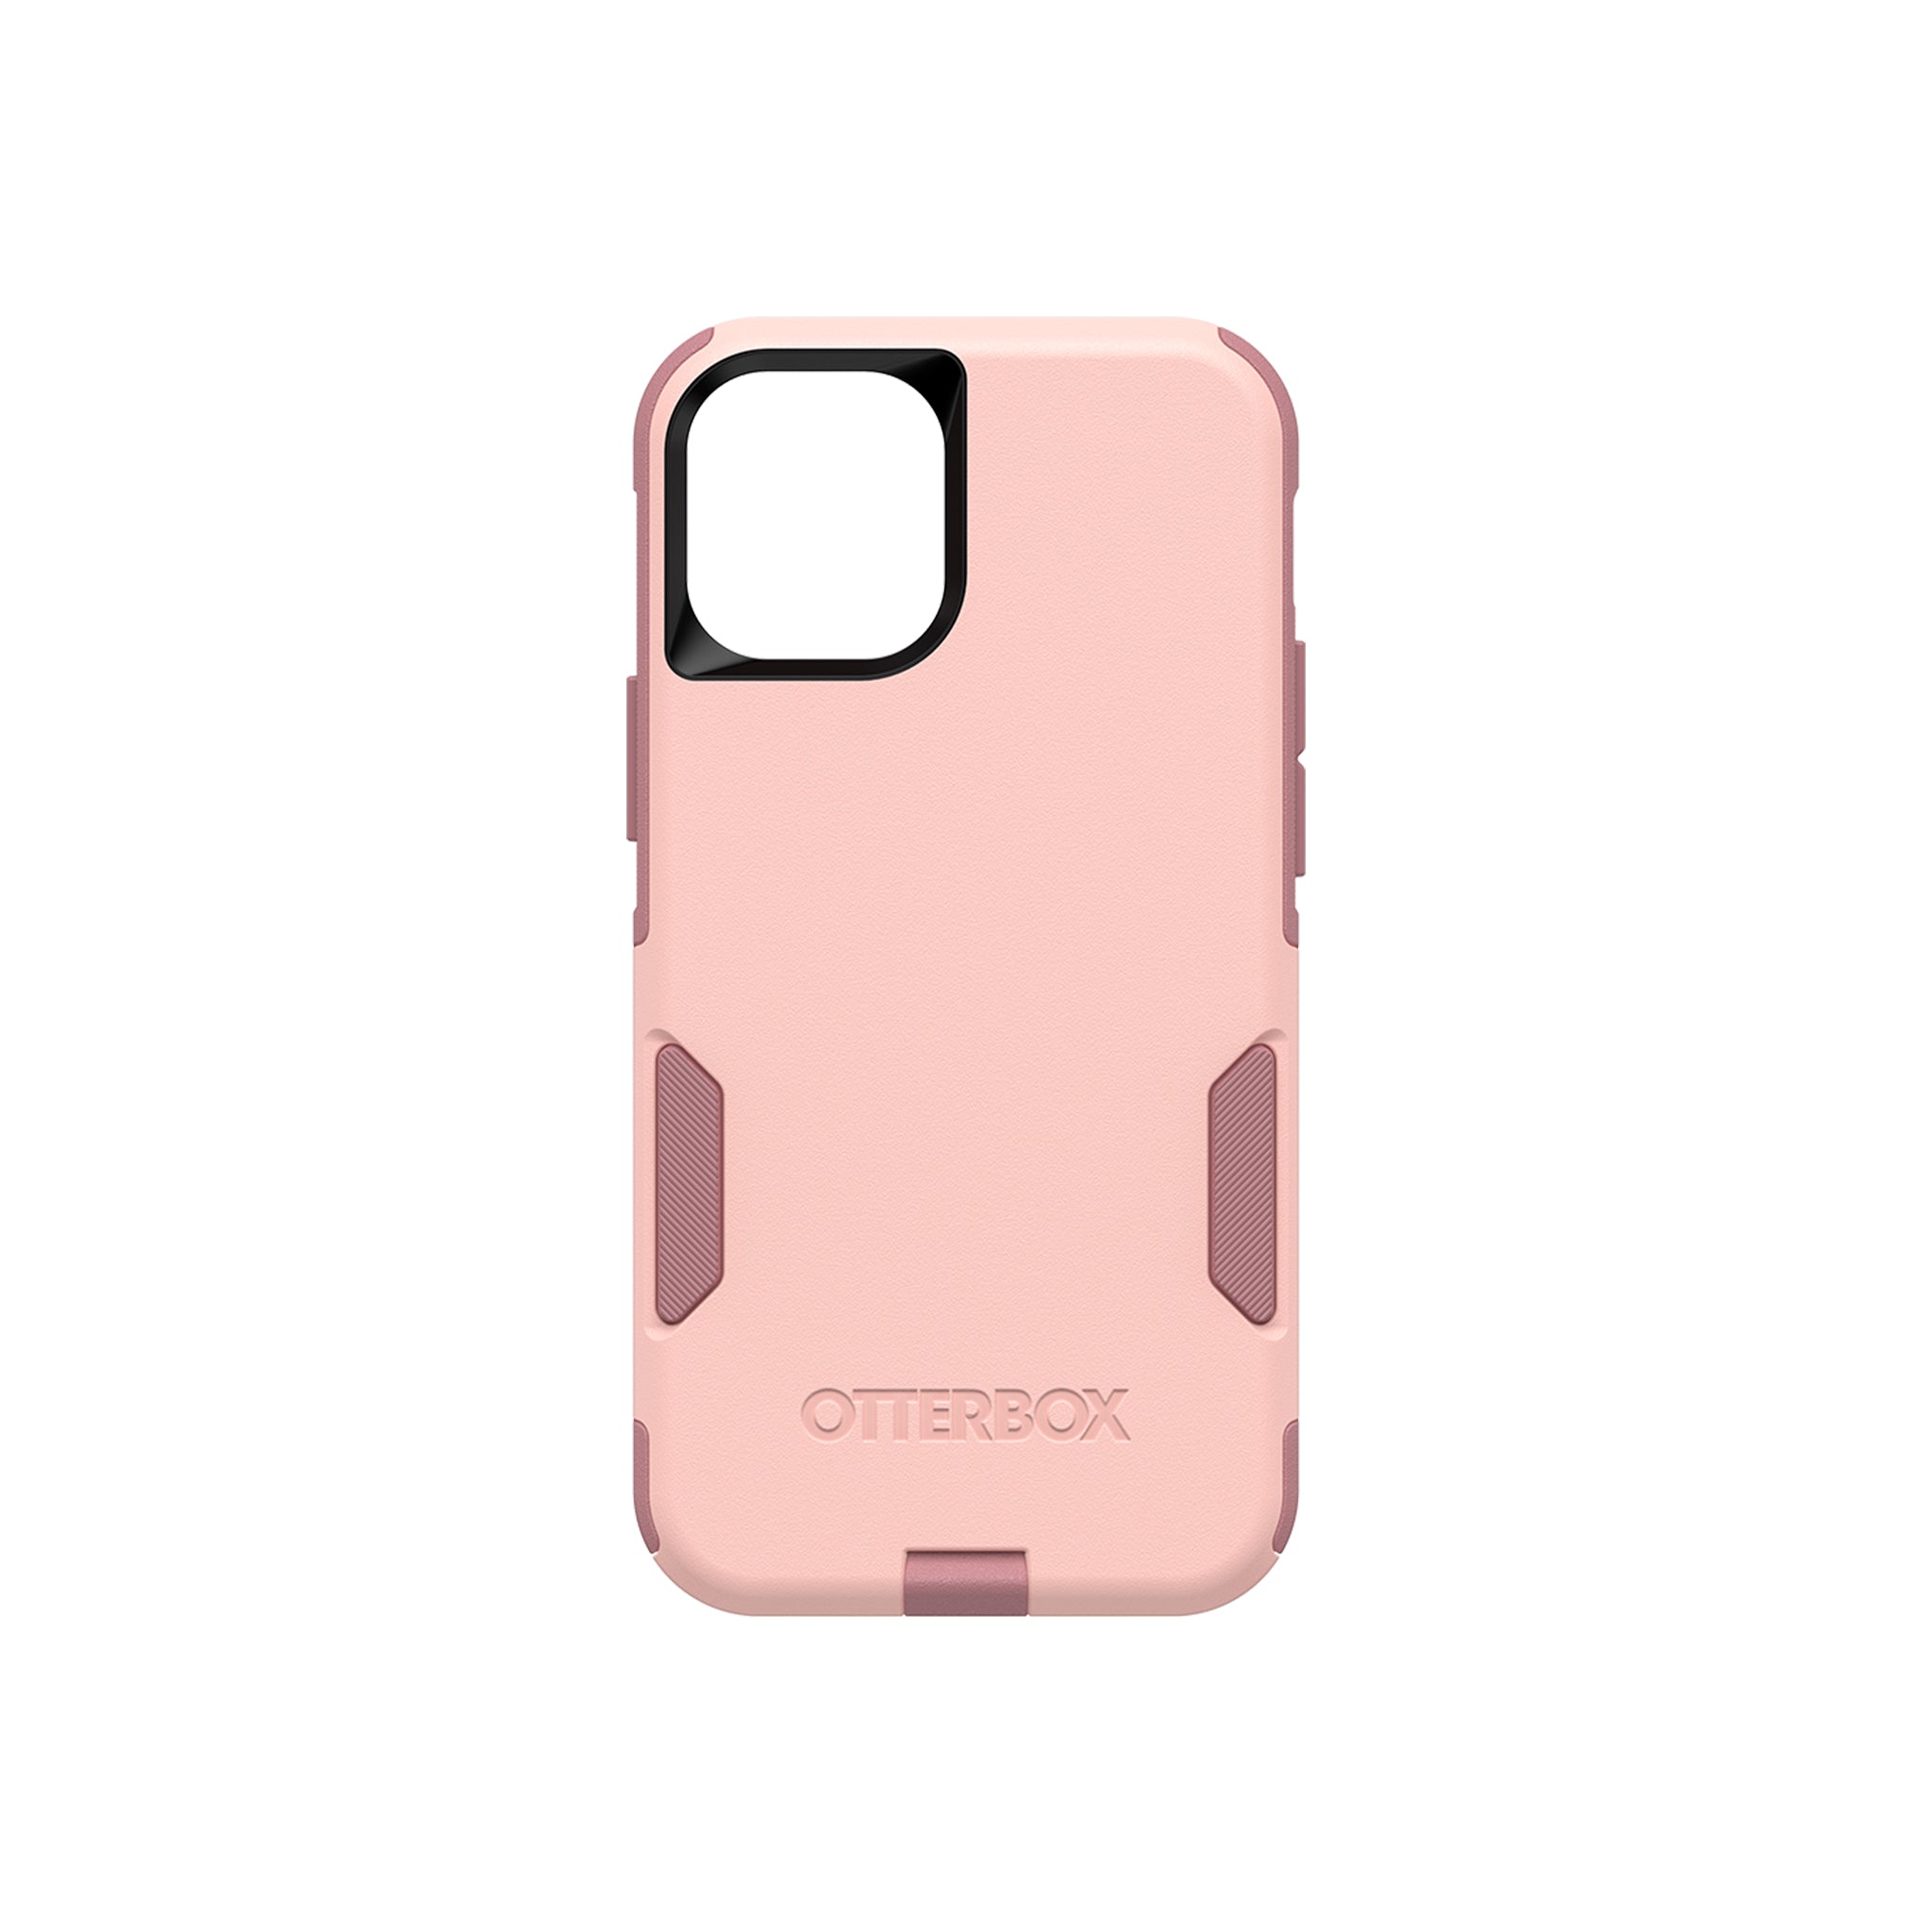 OtterBox - Commuter for iPhone 12 mini - Ballet Way